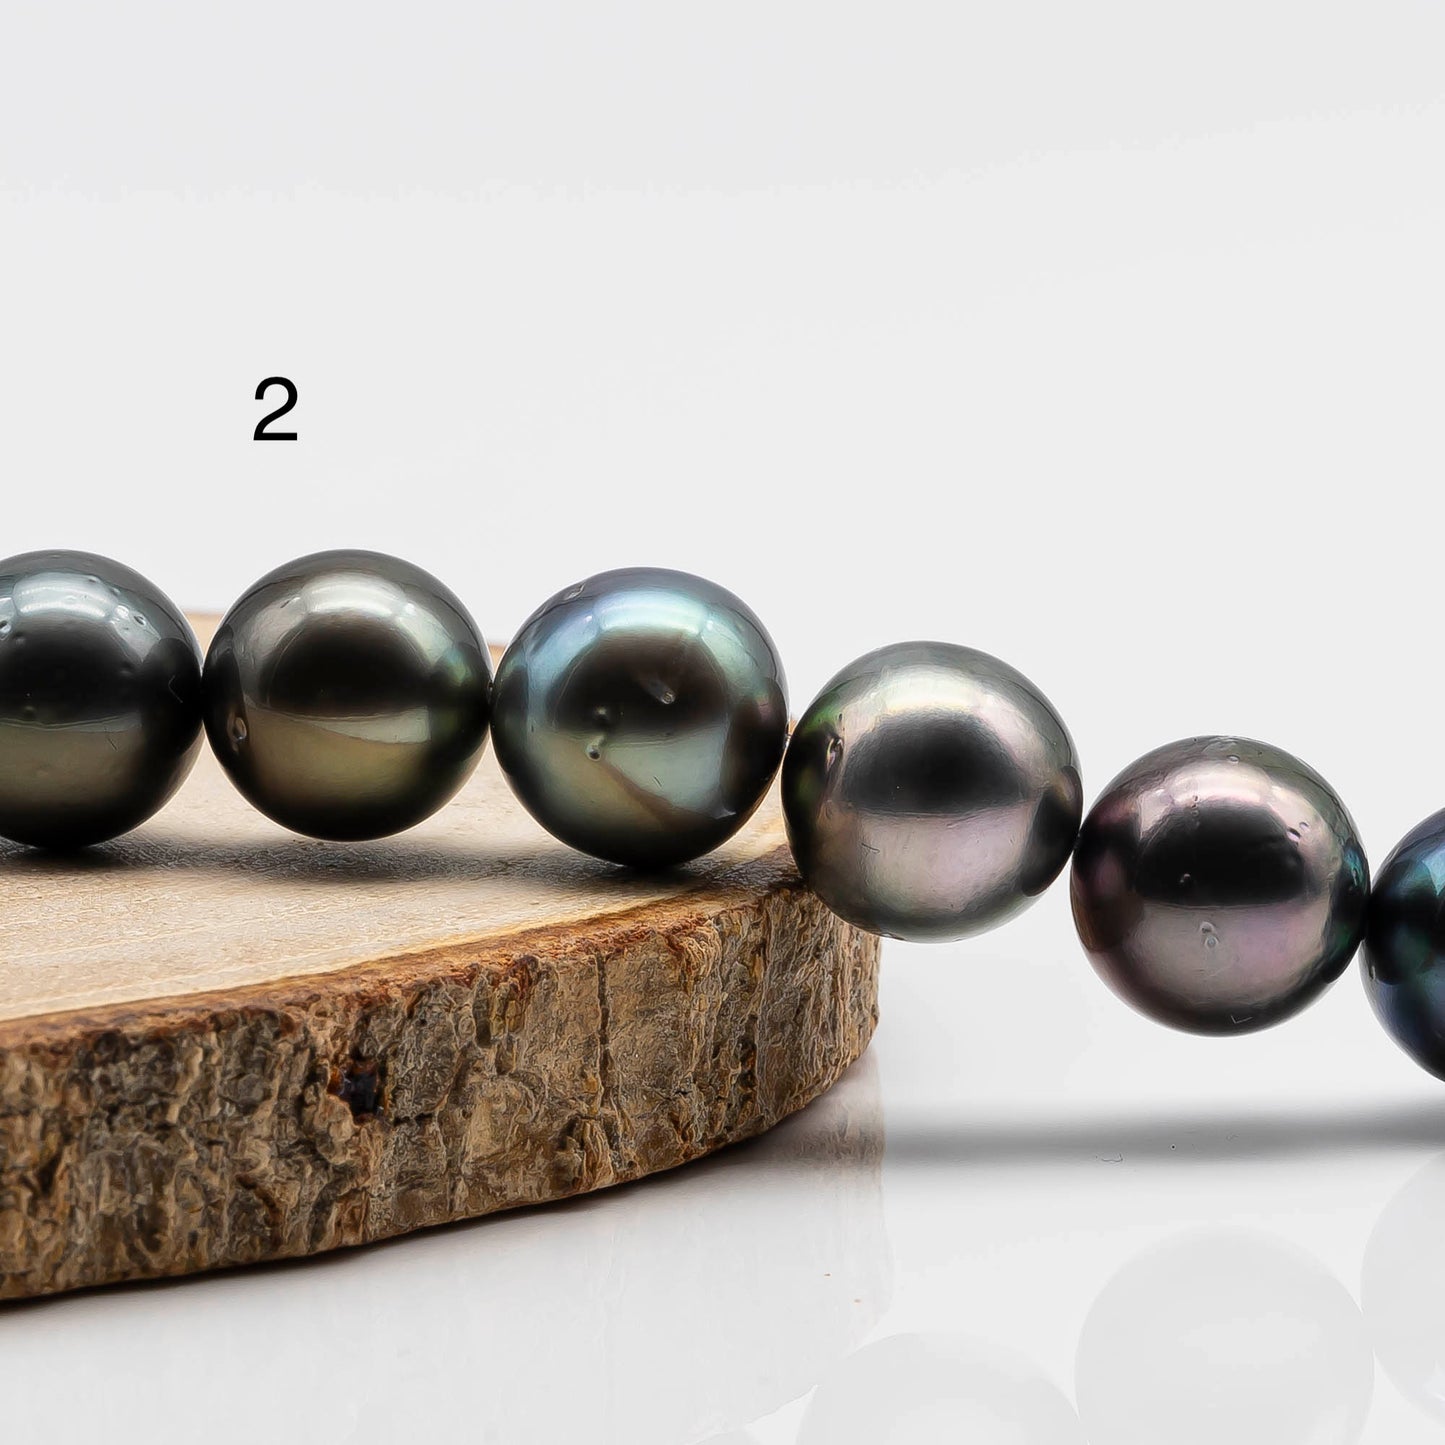 11-12mm Multicolor Round Tahitian Pearl Bead with High Luster, In Full Strand with Blemishes for Jewelry Making, SKU # 1648TH